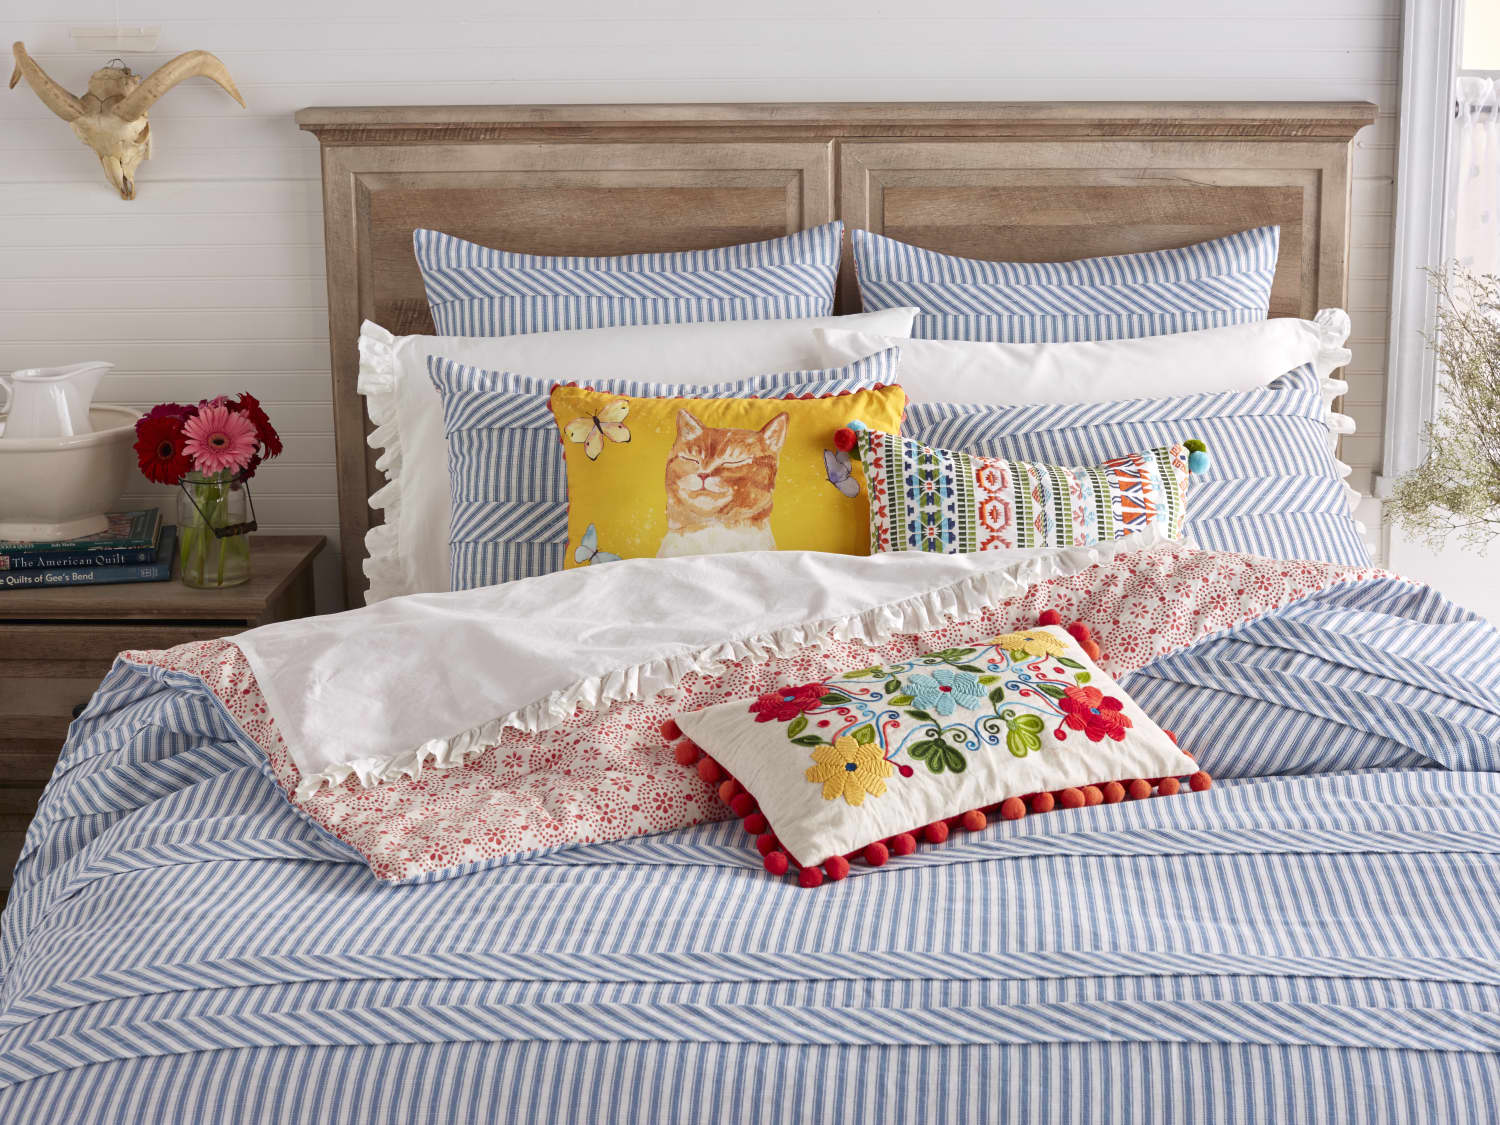 10 Pioneer Woman Bedding Options for a Country-Chic Home